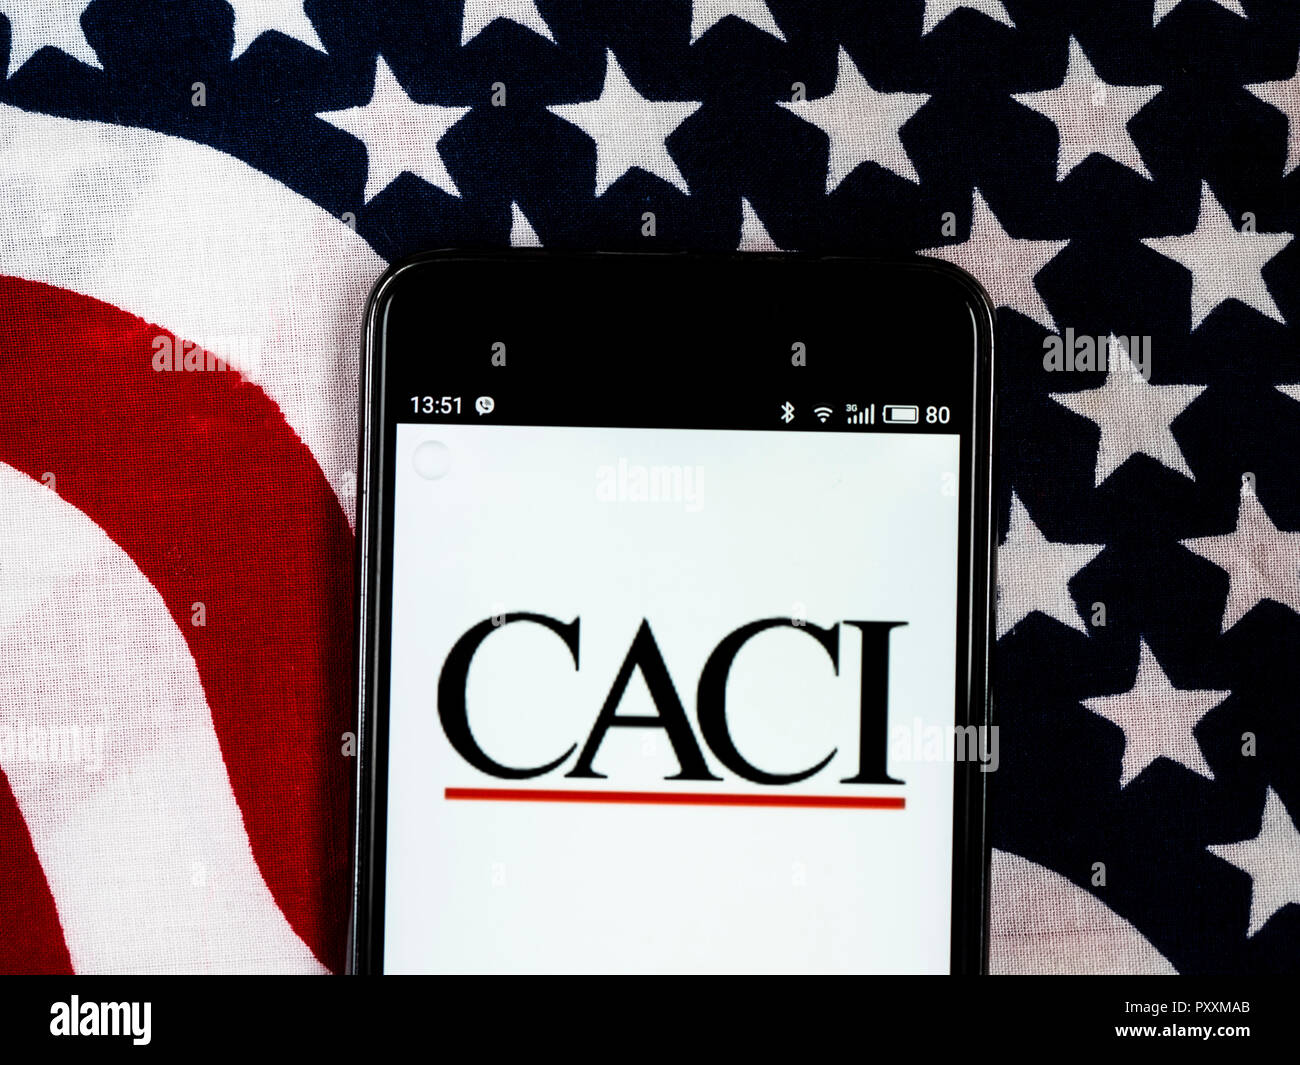 CACI Information technology company logo seen displayed on smart phone.. CACI International Inc is an American multinational professional services and information technology company headquartered in Arlington, Virginia. CACI provides services to many branches of the federal government including defense, homeland security, intelligence, and healthcare. Stock Photo